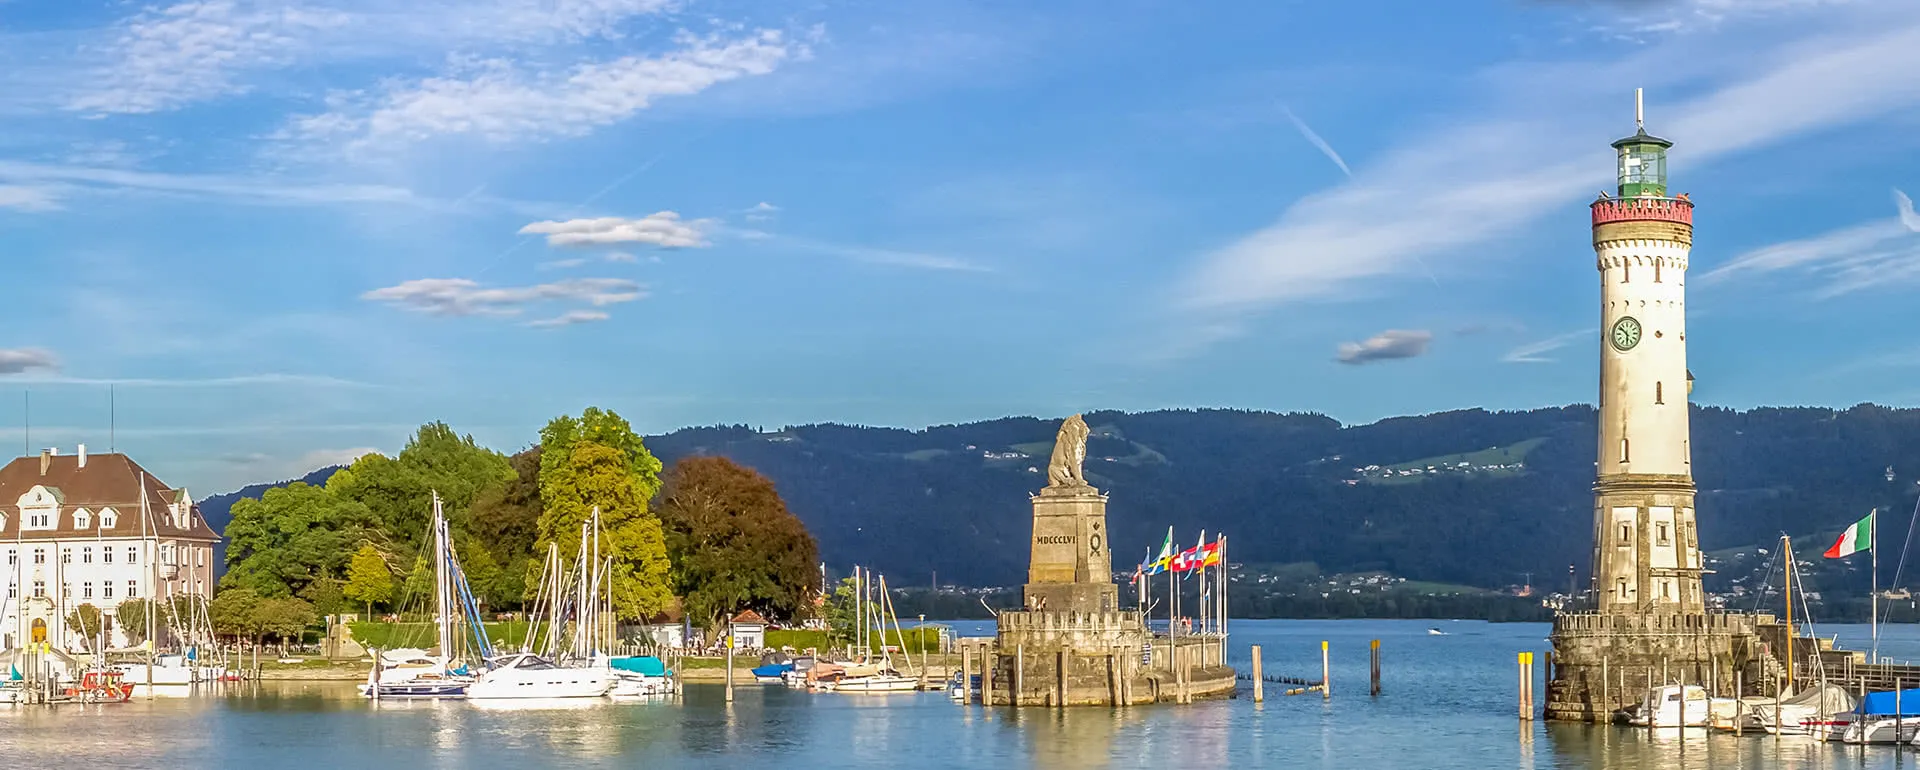 Meeting and conference location Lindau